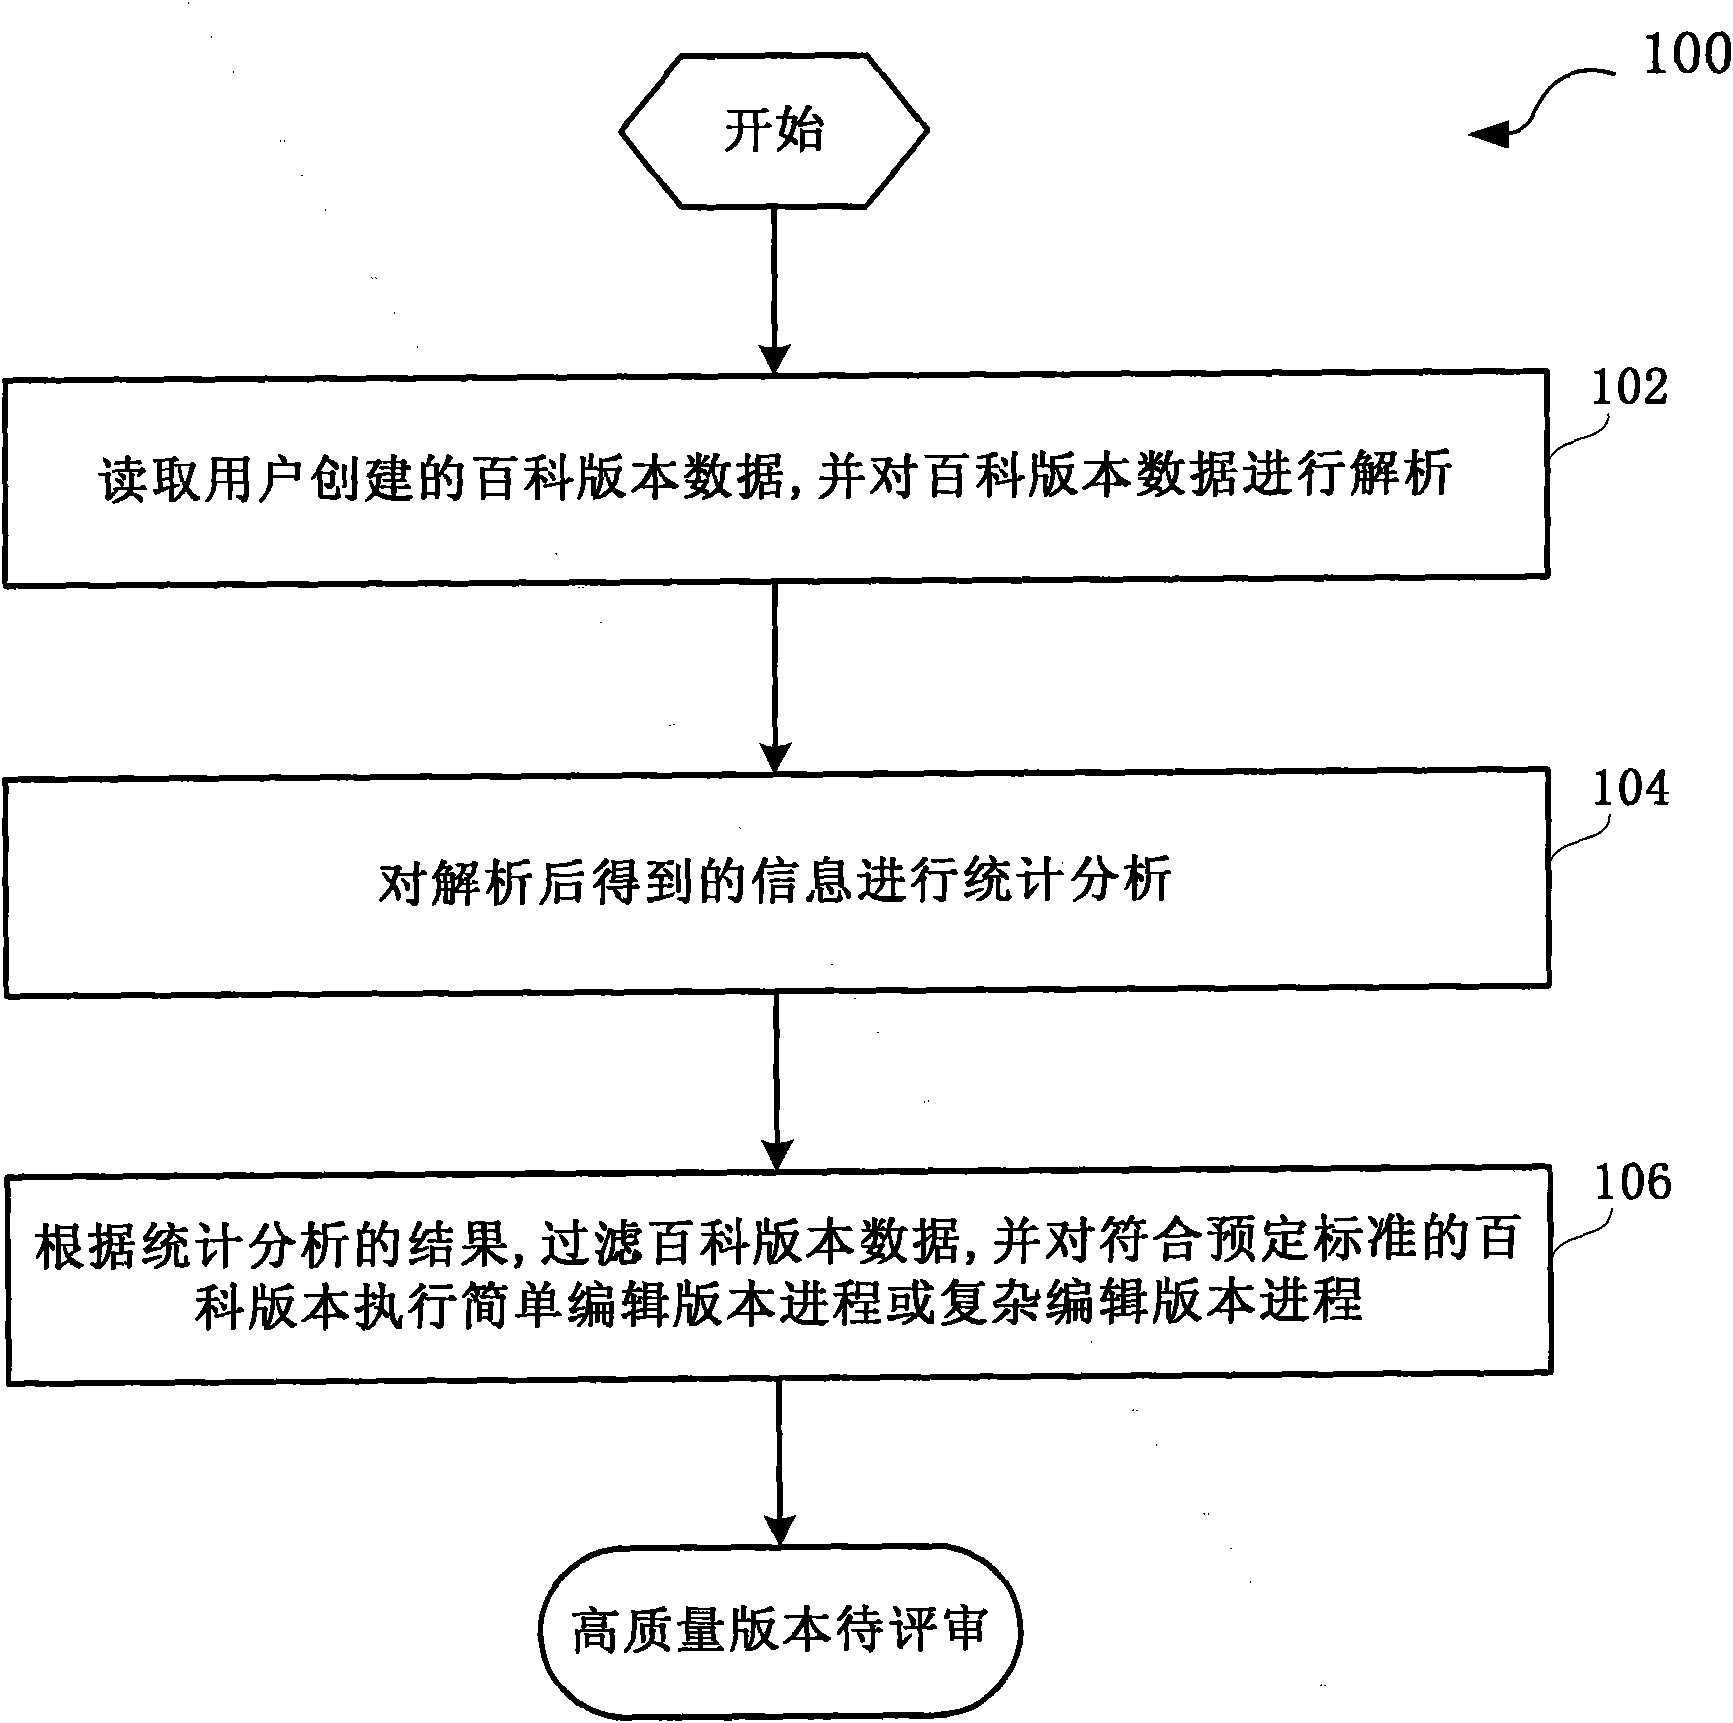 Method and system for screening high-quality versions